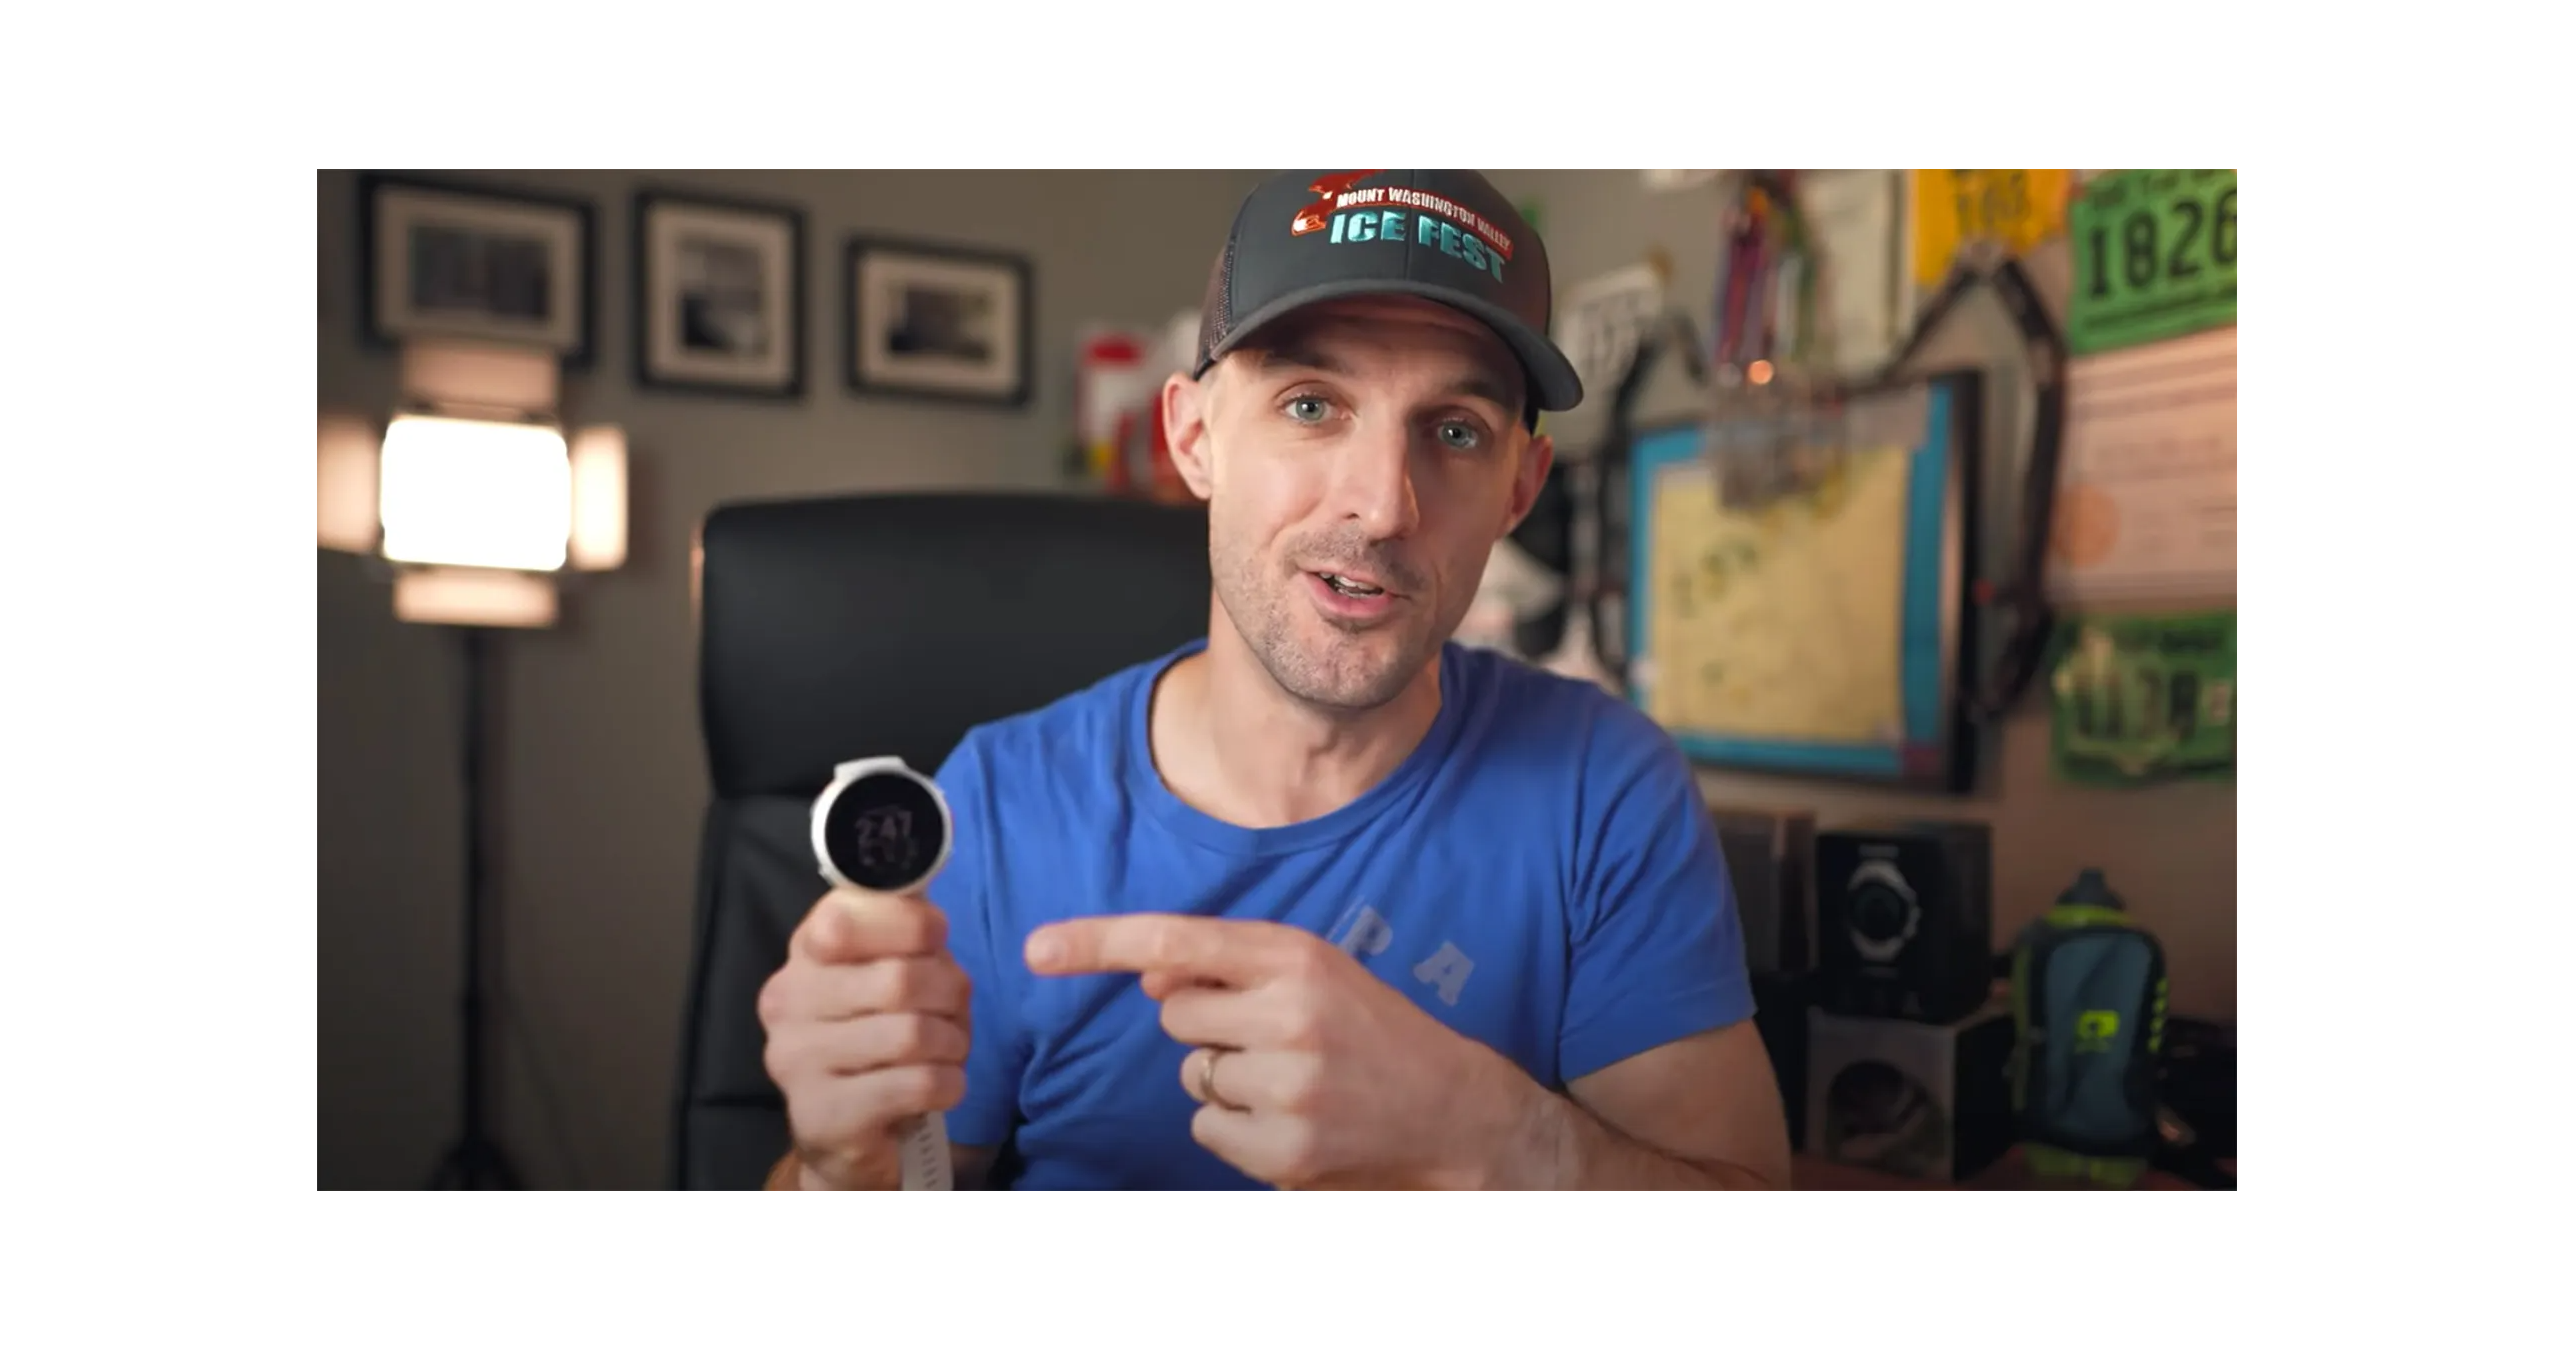 Dave from Chase the Summit with a Polar Vantage V2 he's reviewing